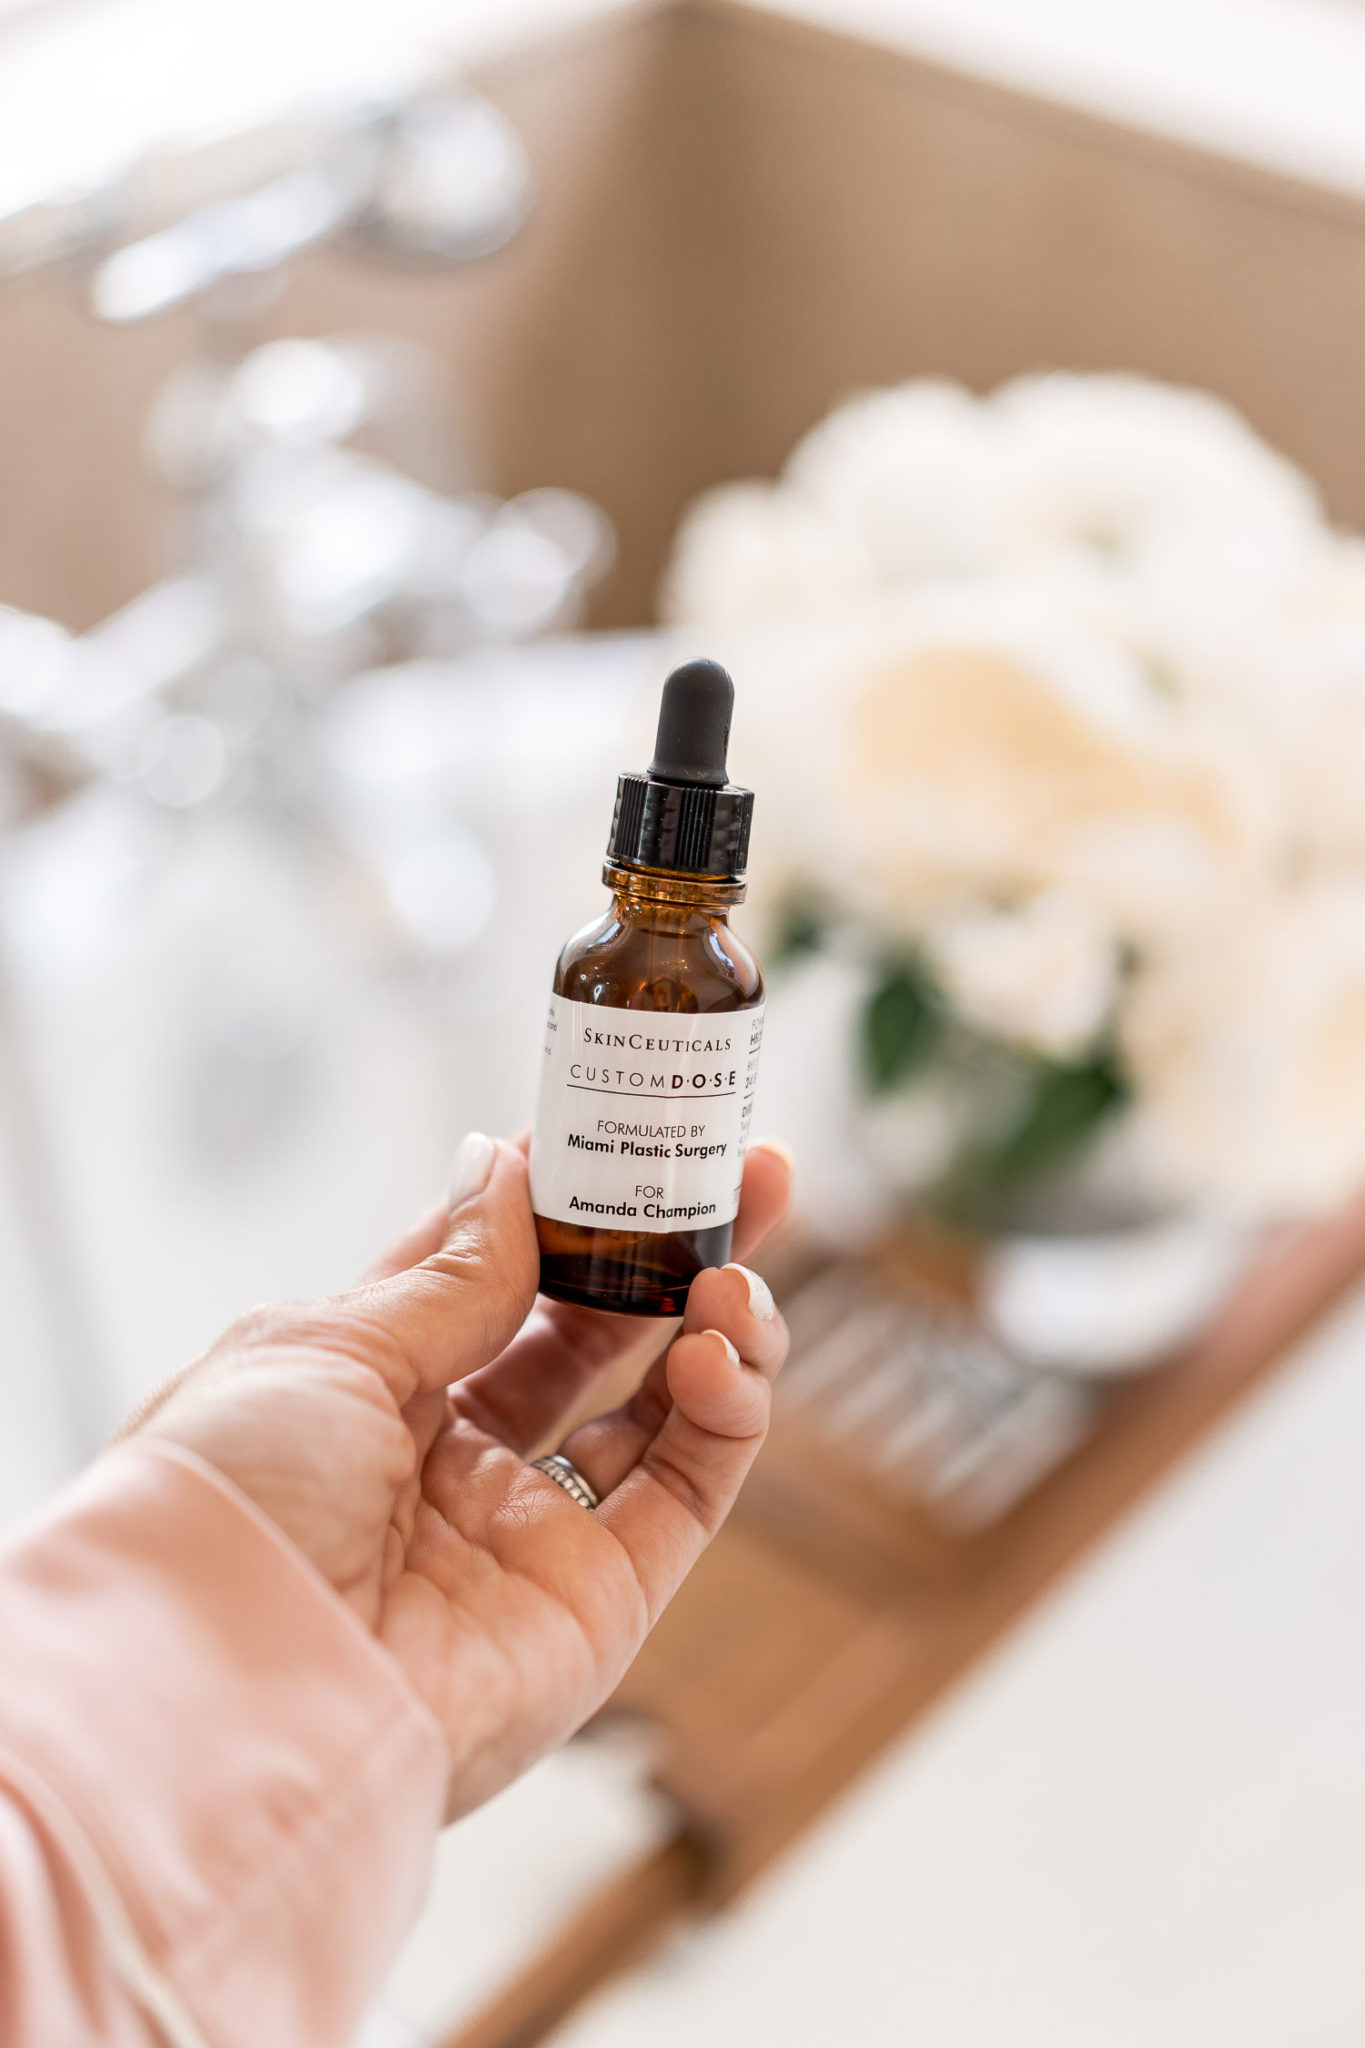 Creating my Custom D.O.S.E with SkinCeuticals